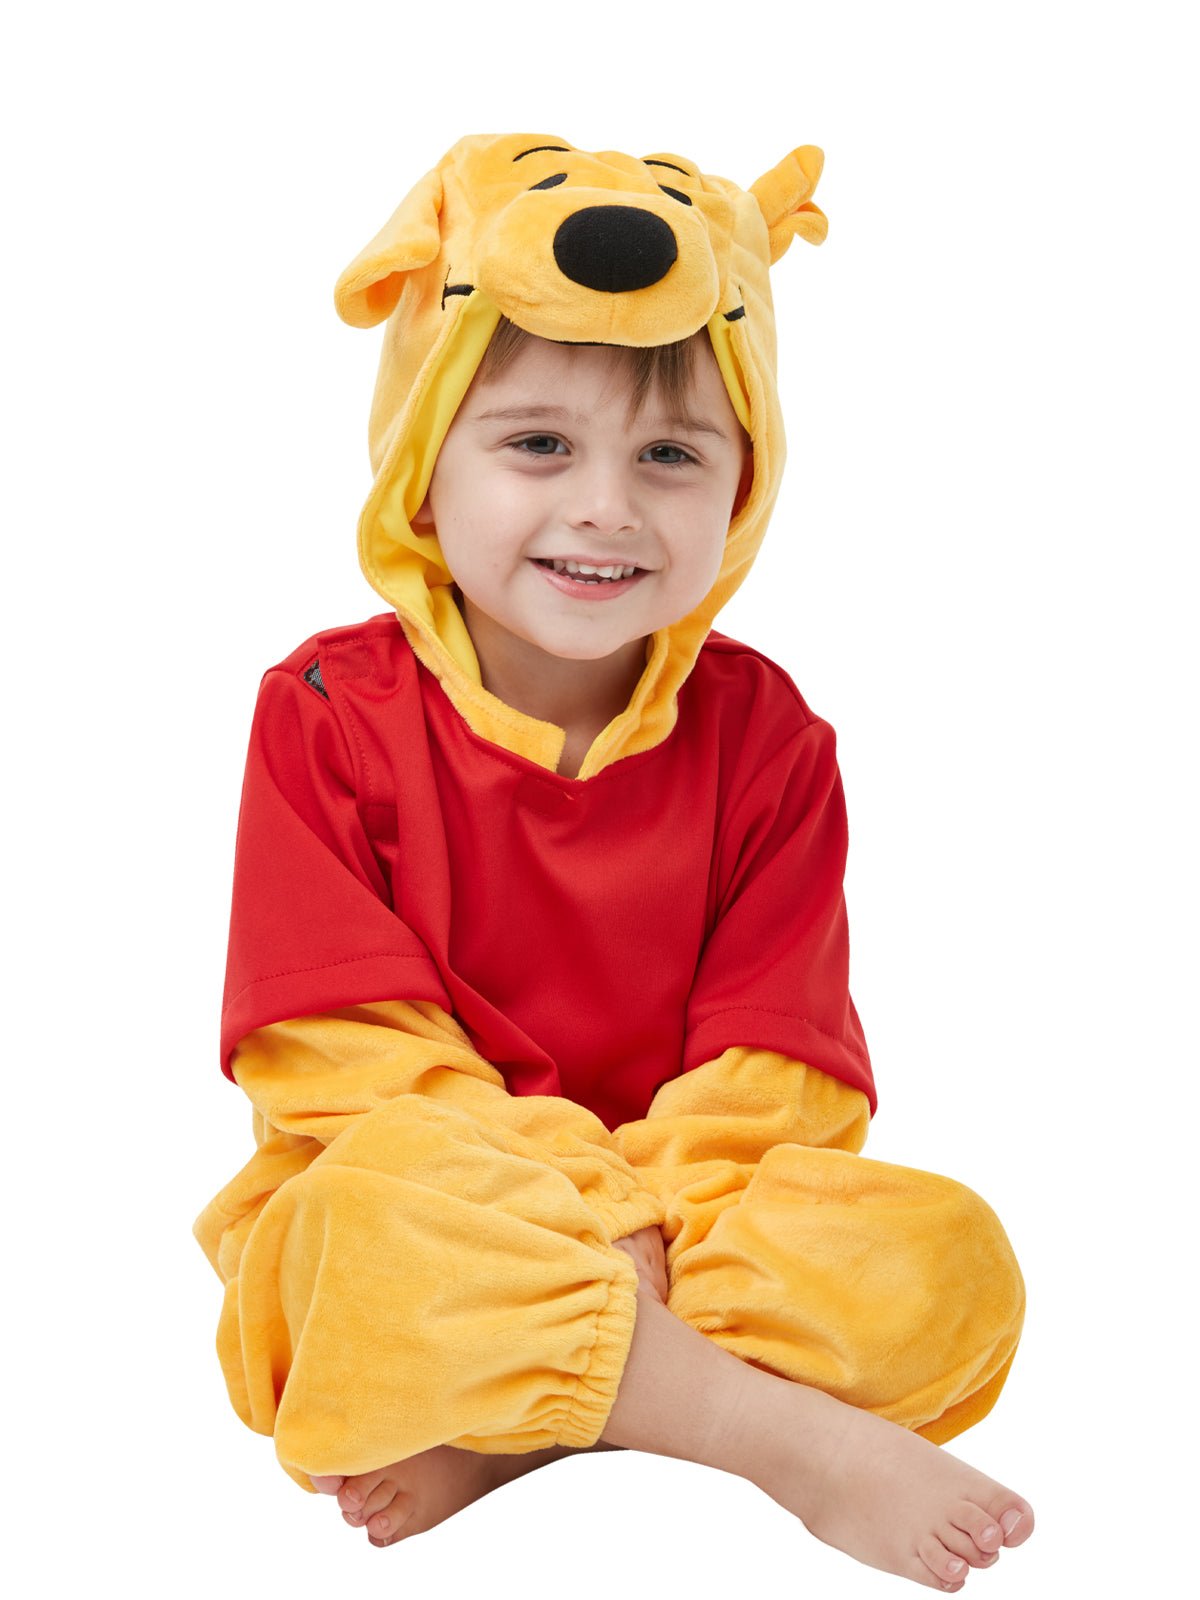 Get Ready for Adventure with Winnie the Pooh Deluxe Kids Costume!